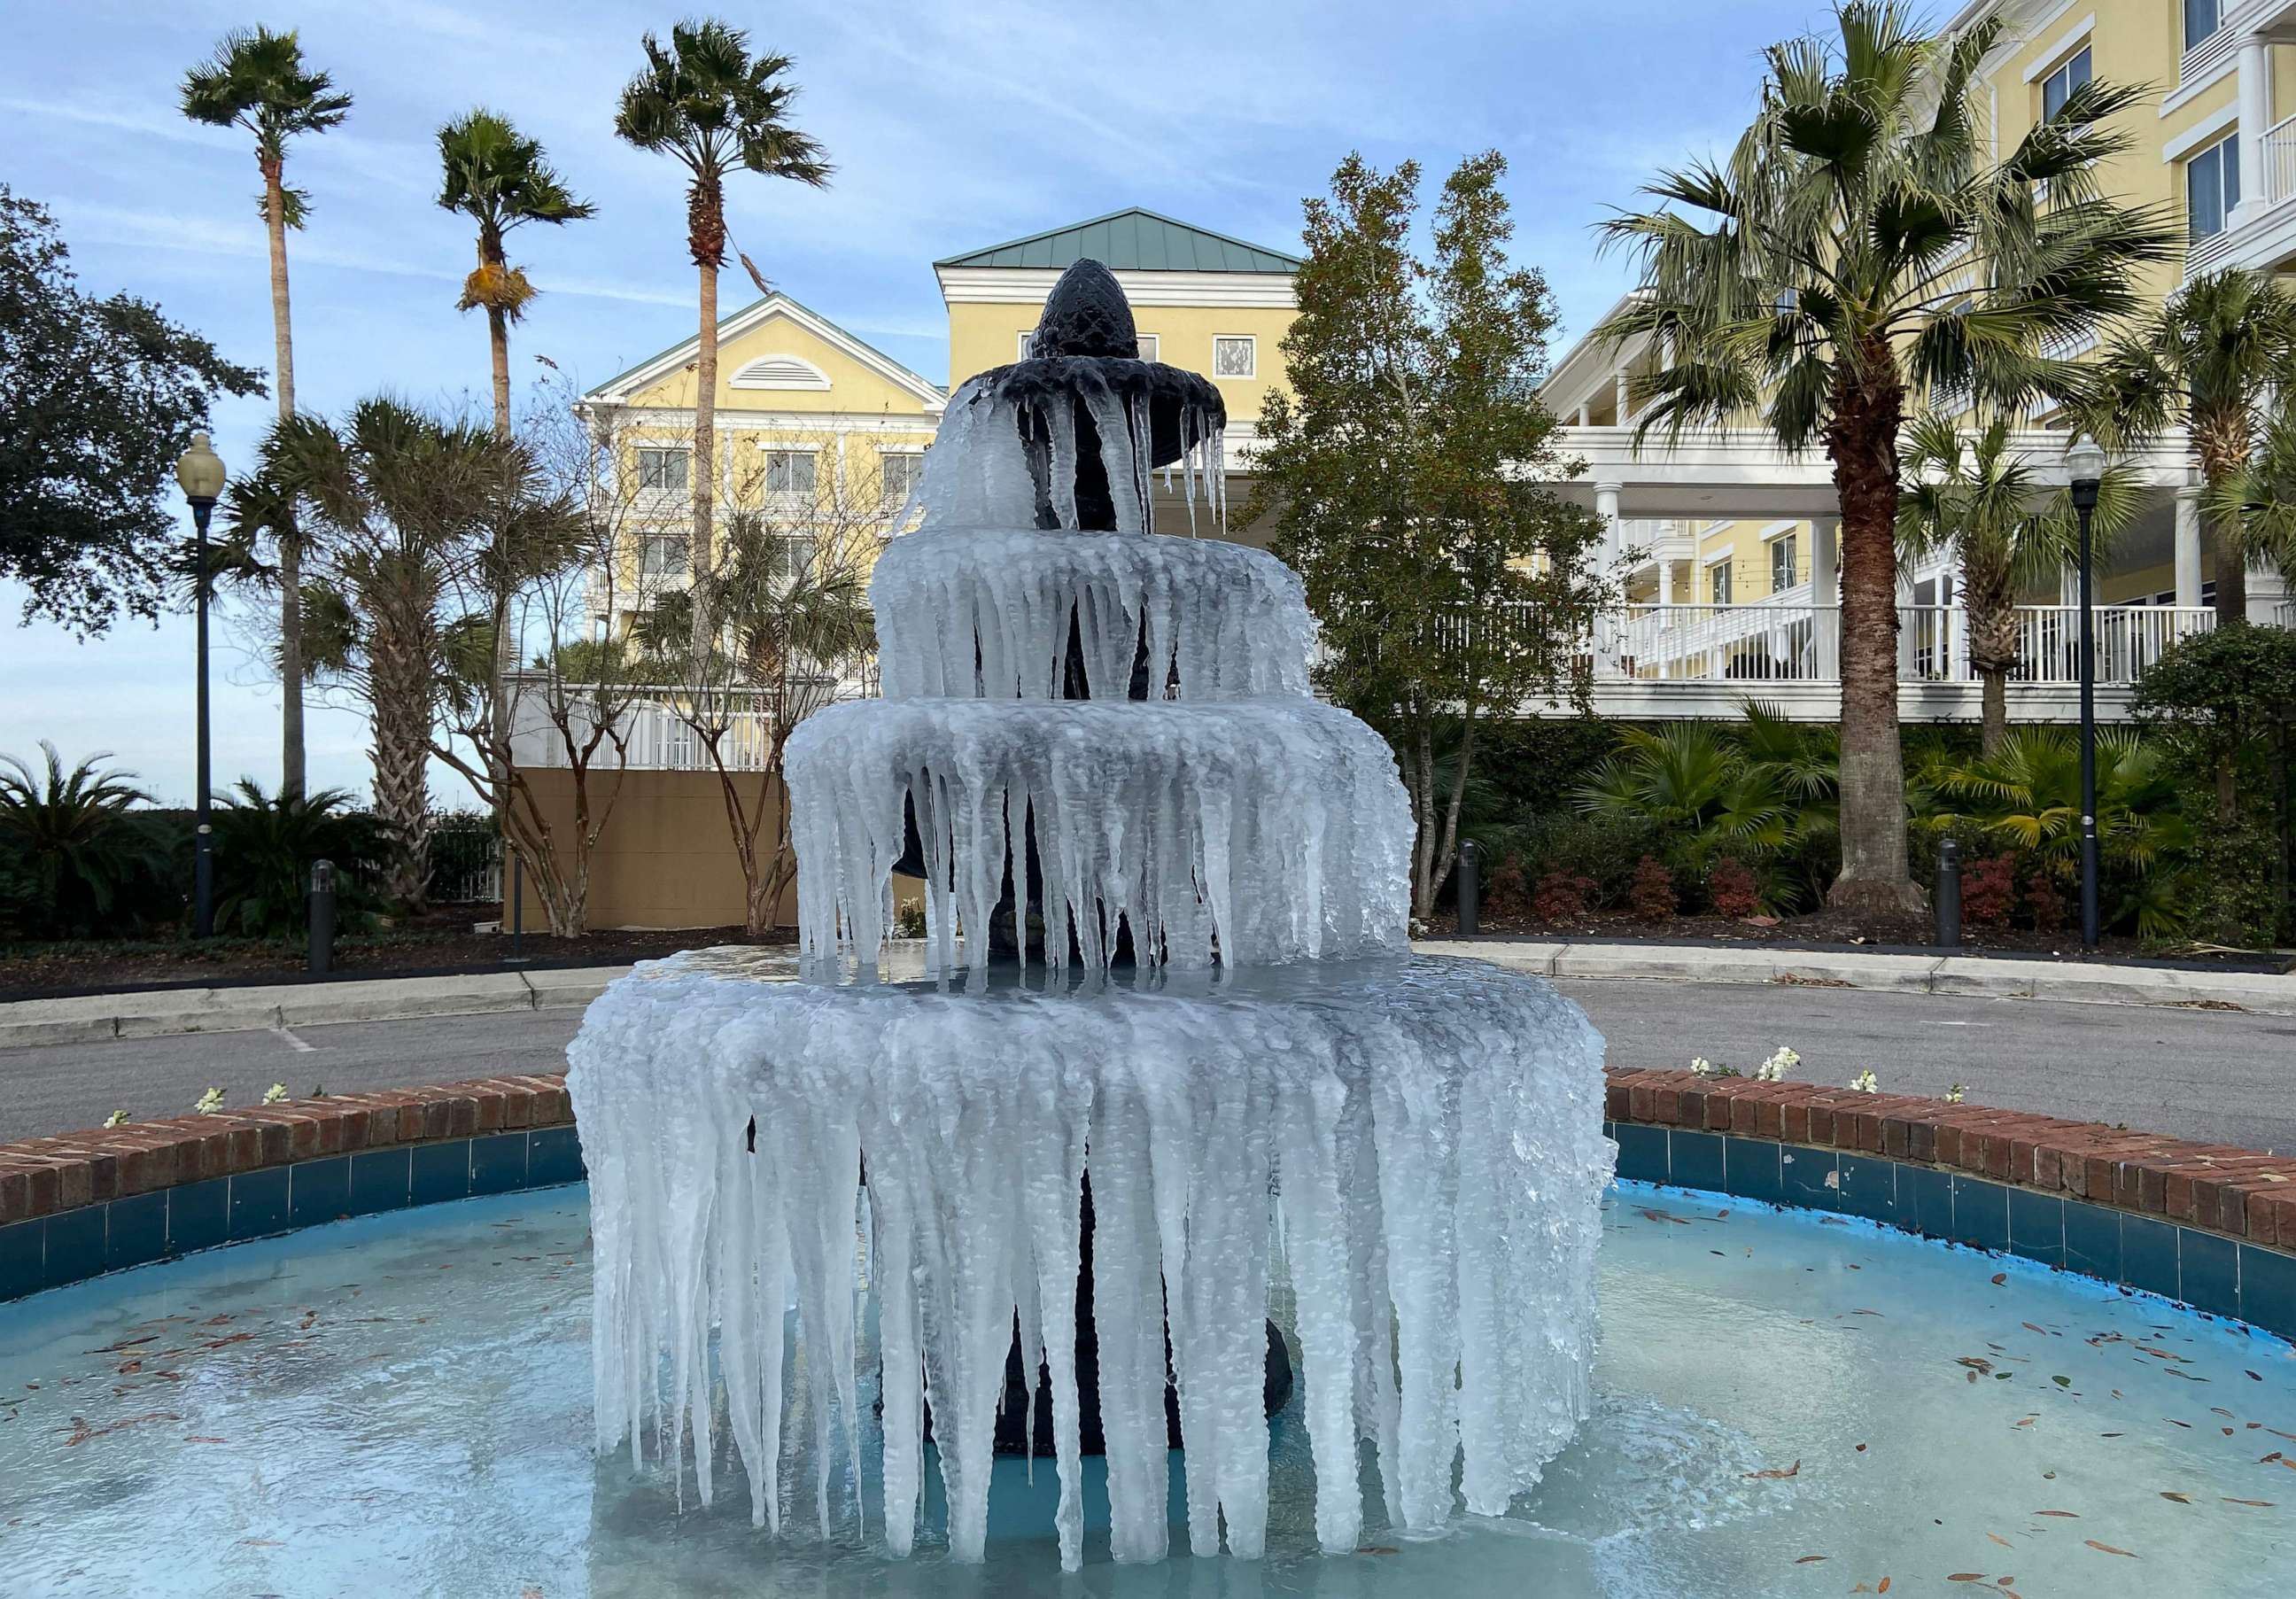 PHOTO: Ice adorns a fountain in Charleston, South Carolina, on December 24, 2022, where temperatures are forecast to reach a high of 32F.